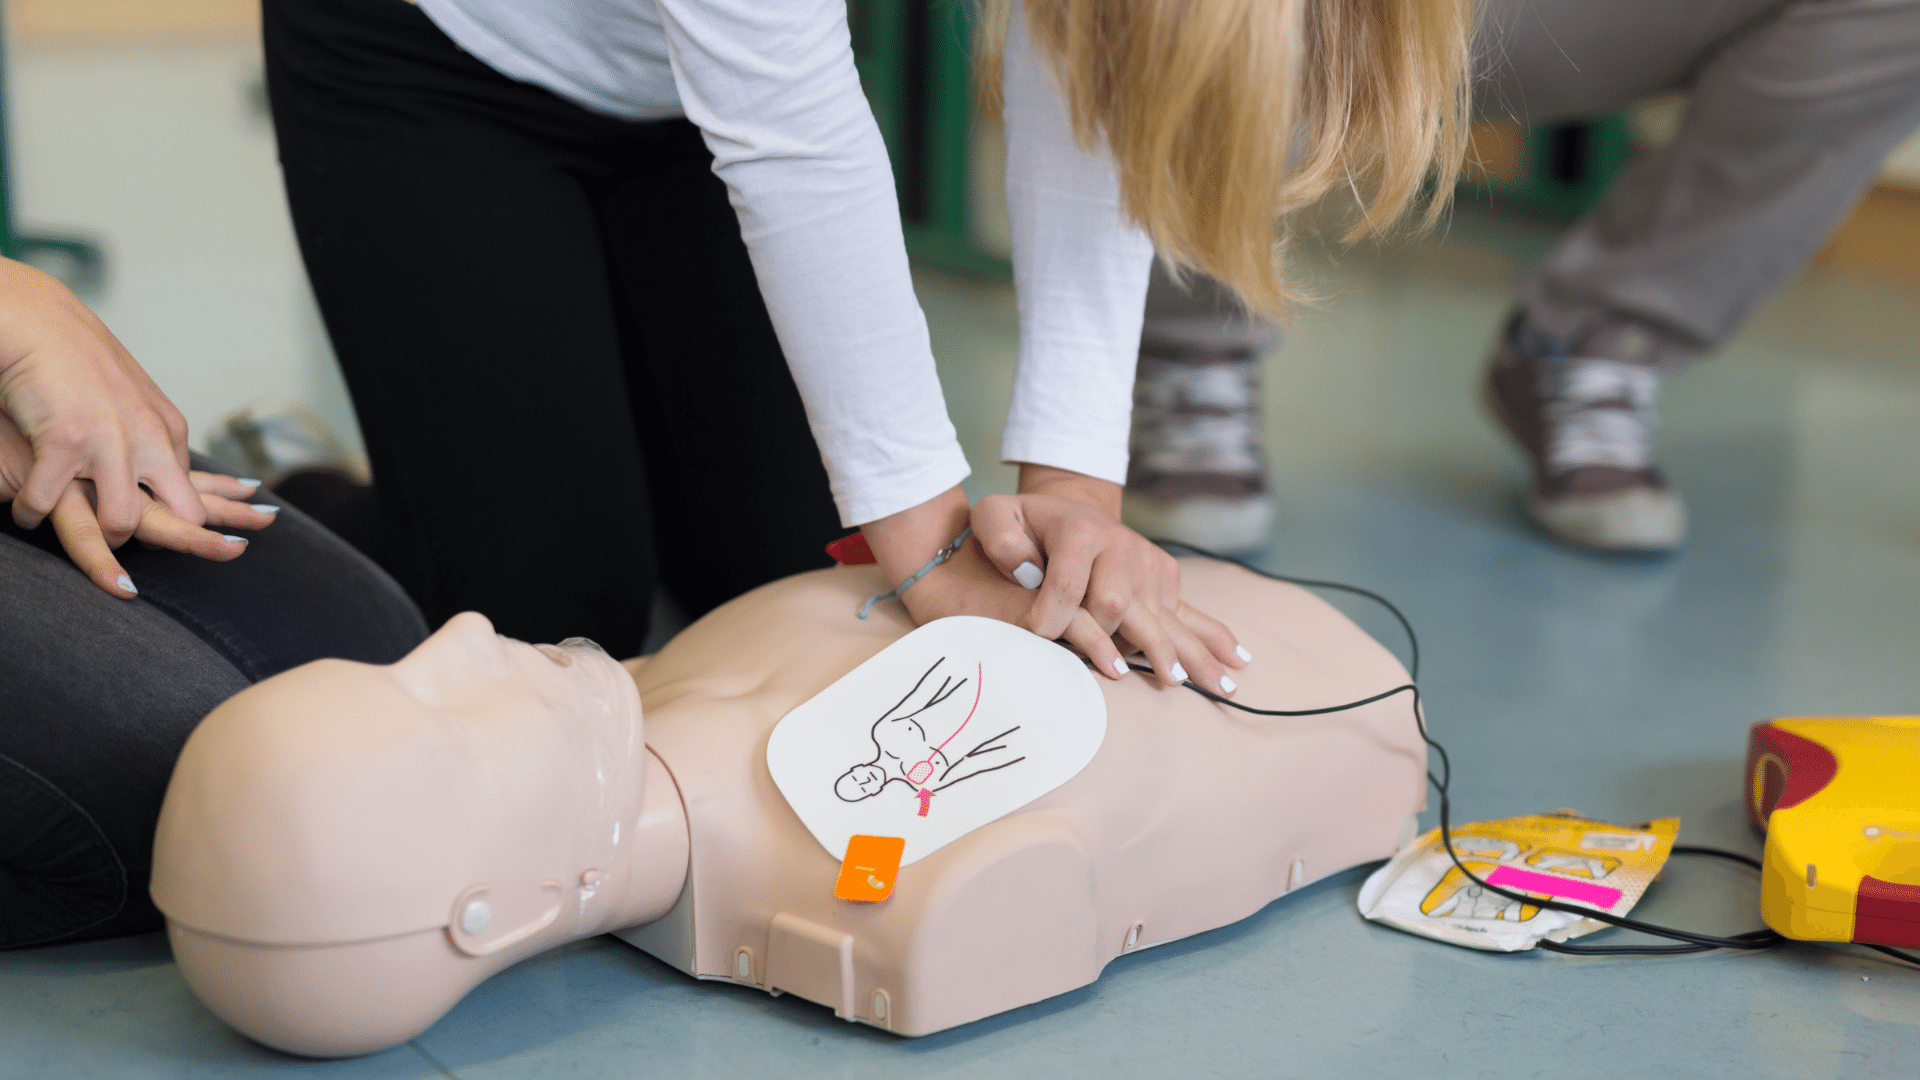 Using AED on a dummy.